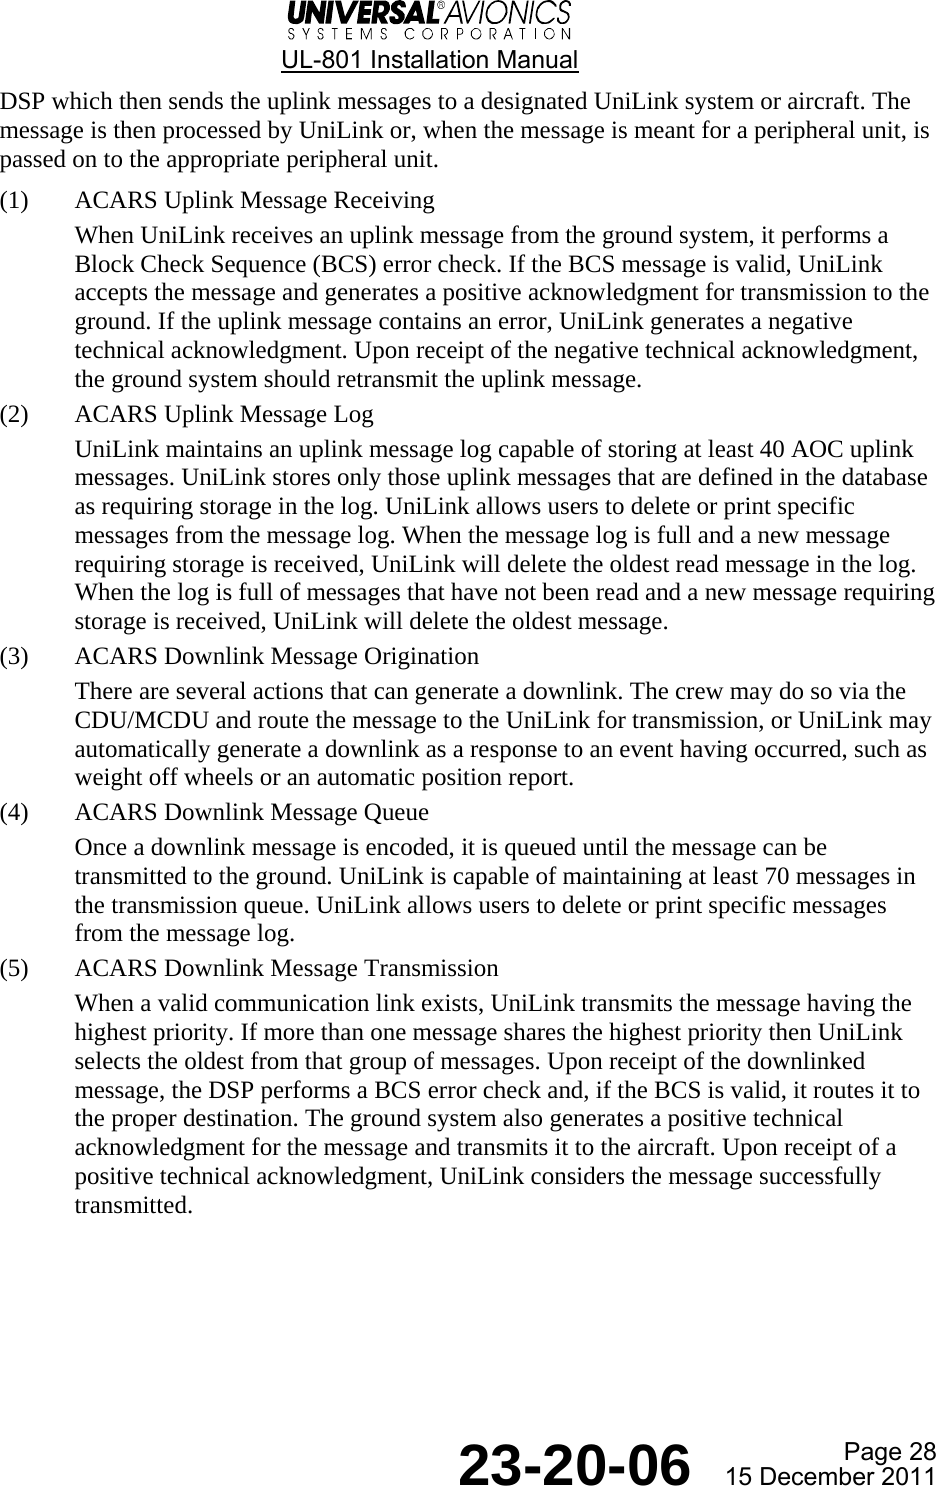  UL-801 Installation Manual  Page 28  23-20-06  15 December 2011 DSP which then sends the uplink messages to a designated UniLink system or aircraft. The message is then processed by UniLink or, when the message is meant for a peripheral unit, is passed on to the appropriate peripheral unit. (1) ACARS Uplink Message Receiving When UniLink receives an uplink message from the ground system, it performs a Block Check Sequence (BCS) error check. If the BCS message is valid, UniLink accepts the message and generates a positive acknowledgment for transmission to the ground. If the uplink message contains an error, UniLink generates a negative technical acknowledgment. Upon receipt of the negative technical acknowledgment, the ground system should retransmit the uplink message. (2) ACARS Uplink Message Log UniLink maintains an uplink message log capable of storing at least 40 AOC uplink messages. UniLink stores only those uplink messages that are defined in the database as requiring storage in the log. UniLink allows users to delete or print specific messages from the message log. When the message log is full and a new message requiring storage is received, UniLink will delete the oldest read message in the log. When the log is full of messages that have not been read and a new message requiring storage is received, UniLink will delete the oldest message. (3) ACARS Downlink Message Origination There are several actions that can generate a downlink. The crew may do so via the CDU/MCDU and route the message to the UniLink for transmission, or UniLink may automatically generate a downlink as a response to an event having occurred, such as weight off wheels or an automatic position report. (4) ACARS Downlink Message Queue Once a downlink message is encoded, it is queued until the message can be transmitted to the ground. UniLink is capable of maintaining at least 70 messages in the transmission queue. UniLink allows users to delete or print specific messages from the message log. (5) ACARS Downlink Message Transmission When a valid communication link exists, UniLink transmits the message having the highest priority. If more than one message shares the highest priority then UniLink selects the oldest from that group of messages. Upon receipt of the downlinked message, the DSP performs a BCS error check and, if the BCS is valid, it routes it to the proper destination. The ground system also generates a positive technical acknowledgment for the message and transmits it to the aircraft. Upon receipt of a positive technical acknowledgment, UniLink considers the message successfully transmitted.    